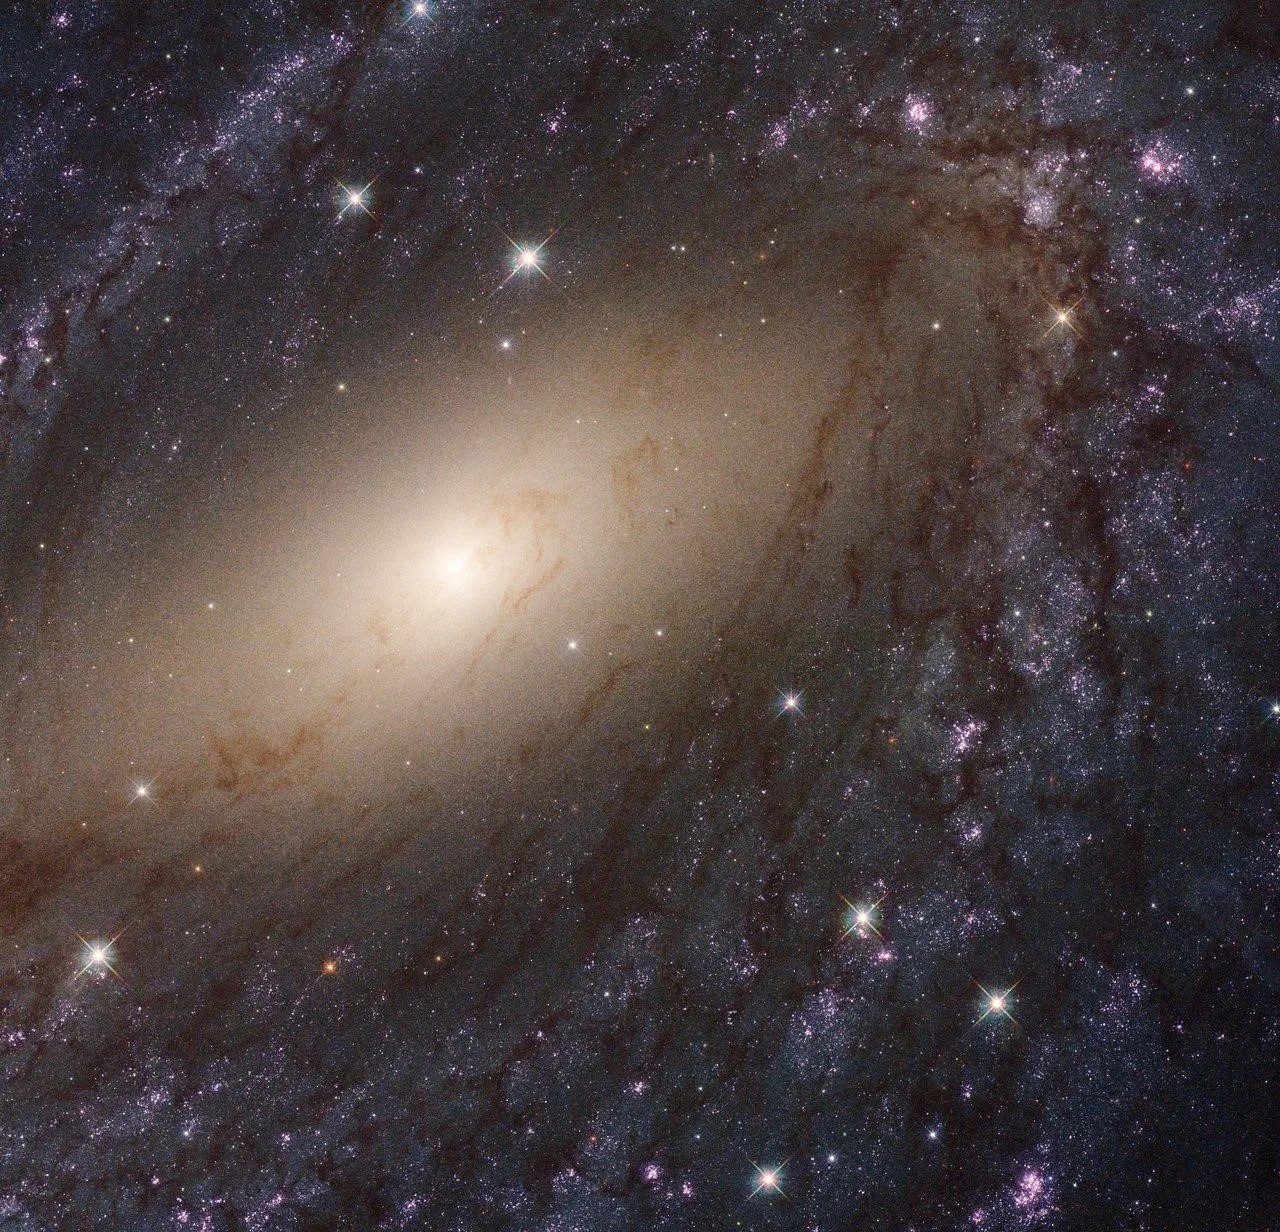 A large spiral galaxy fills the frame. A bright core of stars, just left of center. Dust-filled spiral arms wrap around toward the top, right, and bottom of the image.